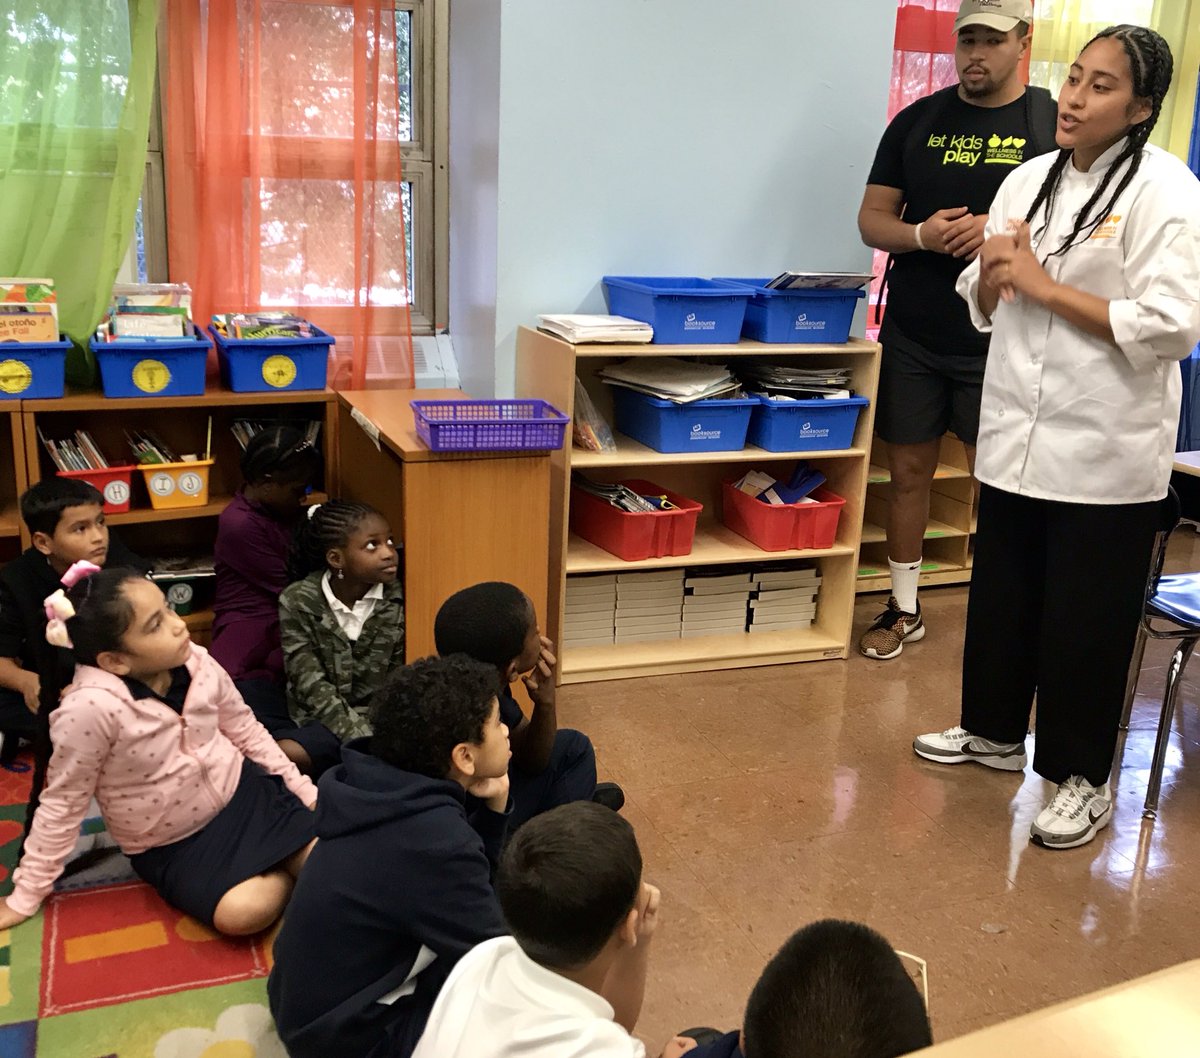 Students asked & received✨212x launches #AlternativeSchoolMenu & #Freshfruitsvegetables program today! Providing #access to  #chef #Movementcoach & #wholefoods to support #wellbeing of our #youth. Karen & Louann @MontefioreNYC #wellnessinschools #schoolfoodsnyc